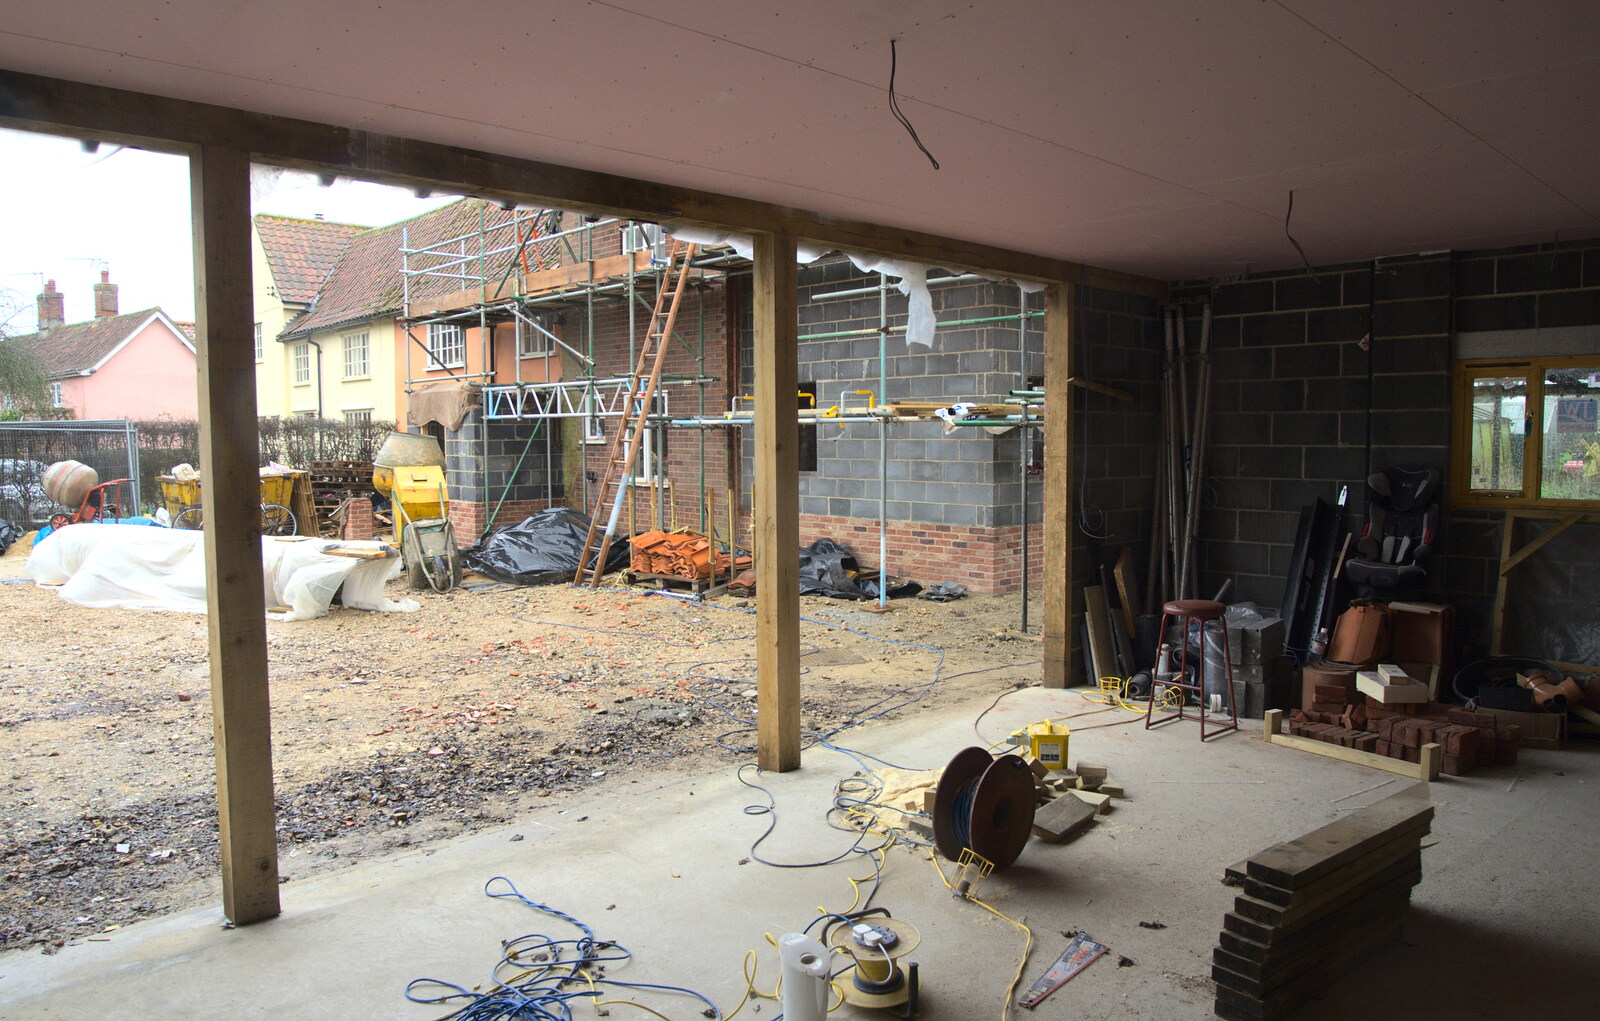 The view from the garage from A Night at the Bank, and a Building Update, Brome and Eye, Suffolk - 7th February 2014